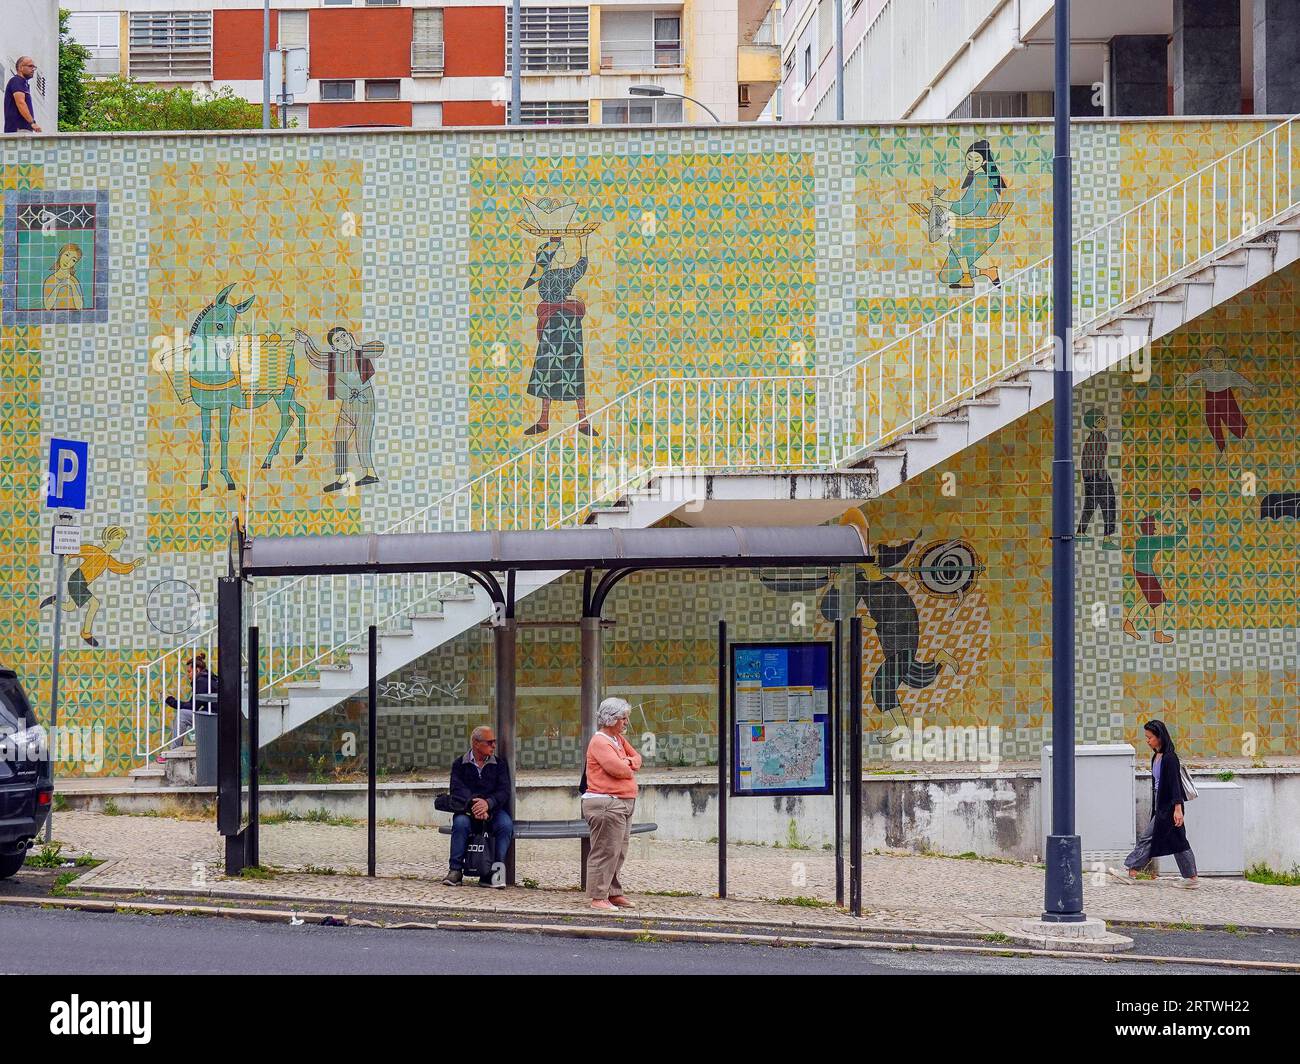 Portugal, Lisbon, The Azulejo Route includes a series of large decorative murals covered in traditional Portuguese tile. The walls, with frontal stair Stock Photo